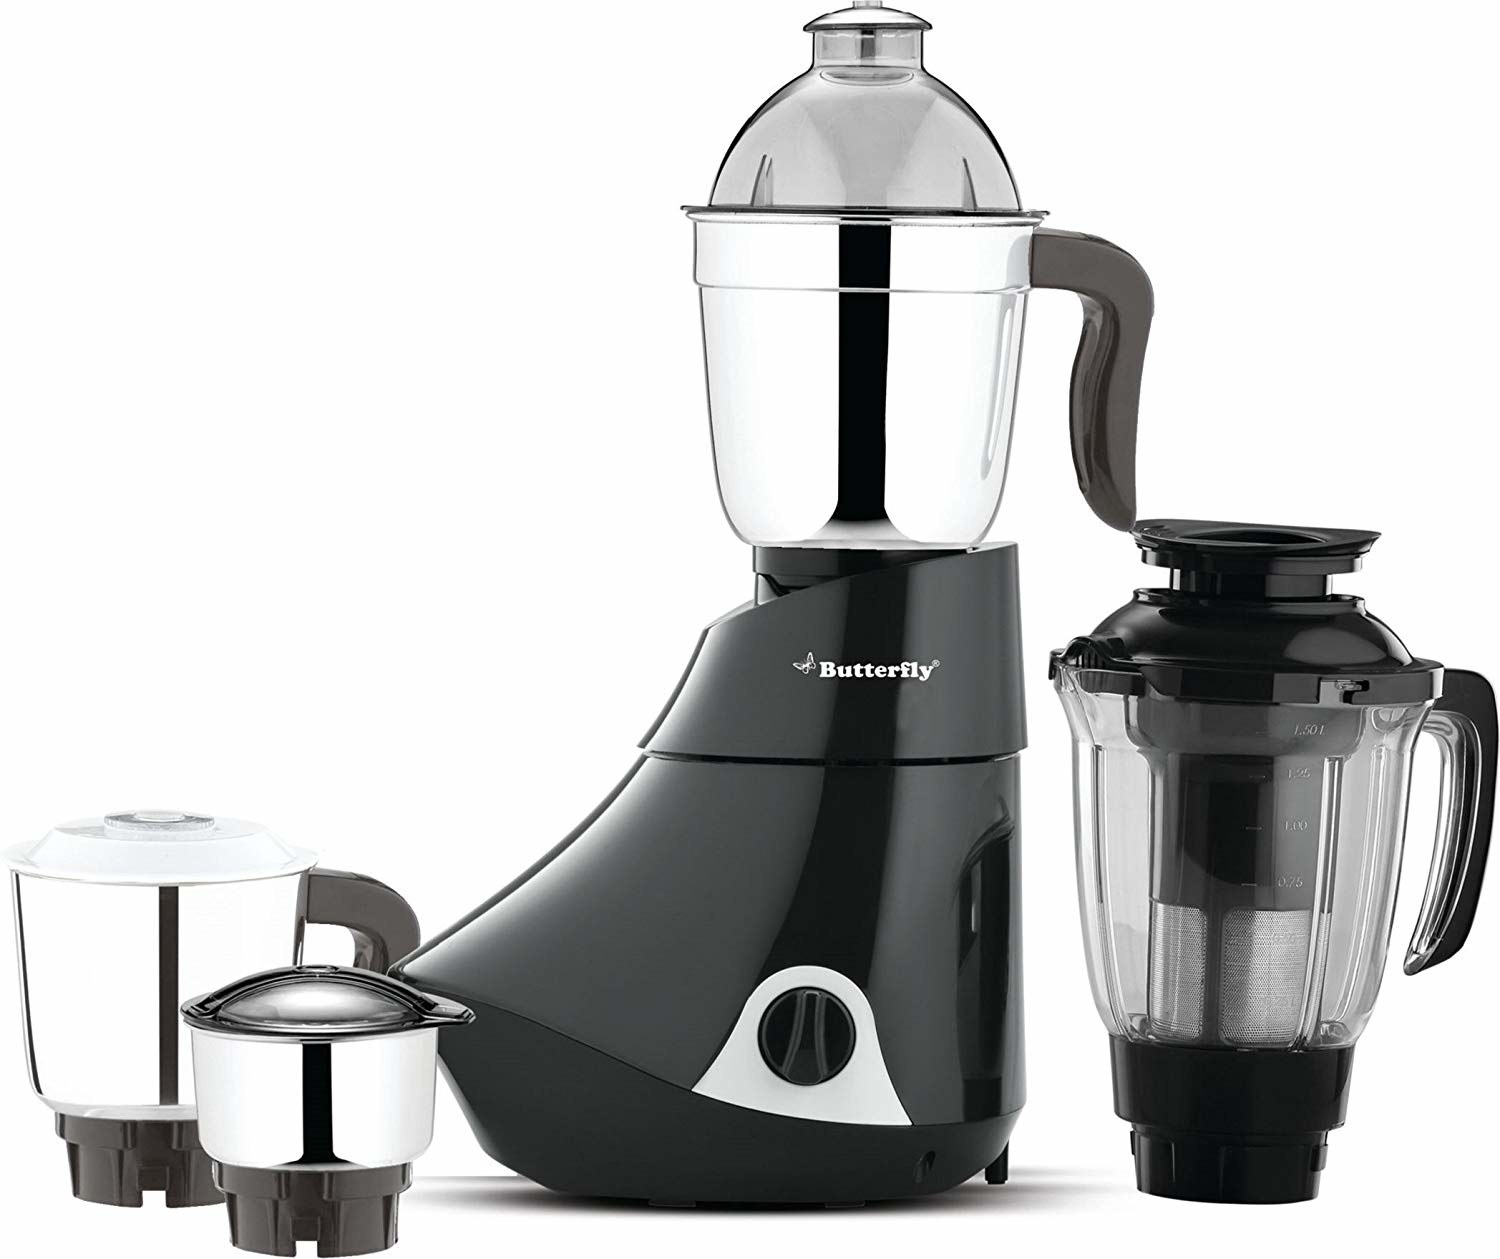 A butterfly mixer grinder in black and silver next to its various attachments.